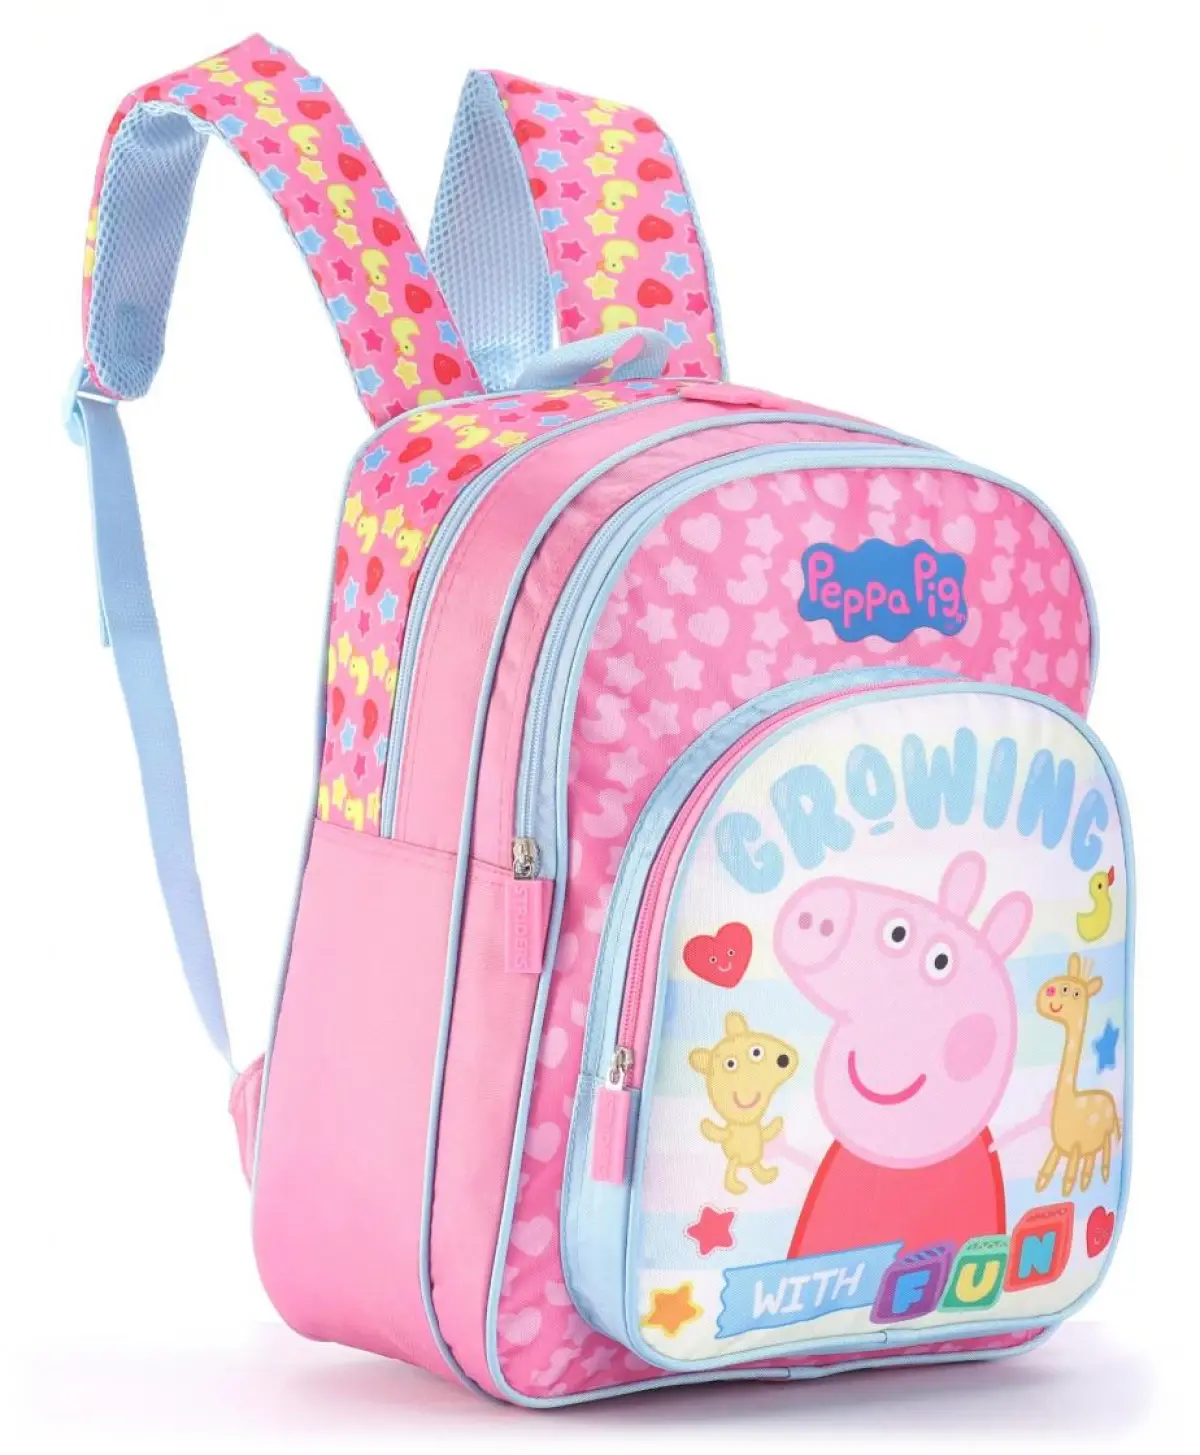 Striders 14 inches Peppa Pig-Inspired School Bag for Little Explorers Multicolor For Kids Ages 3Y+